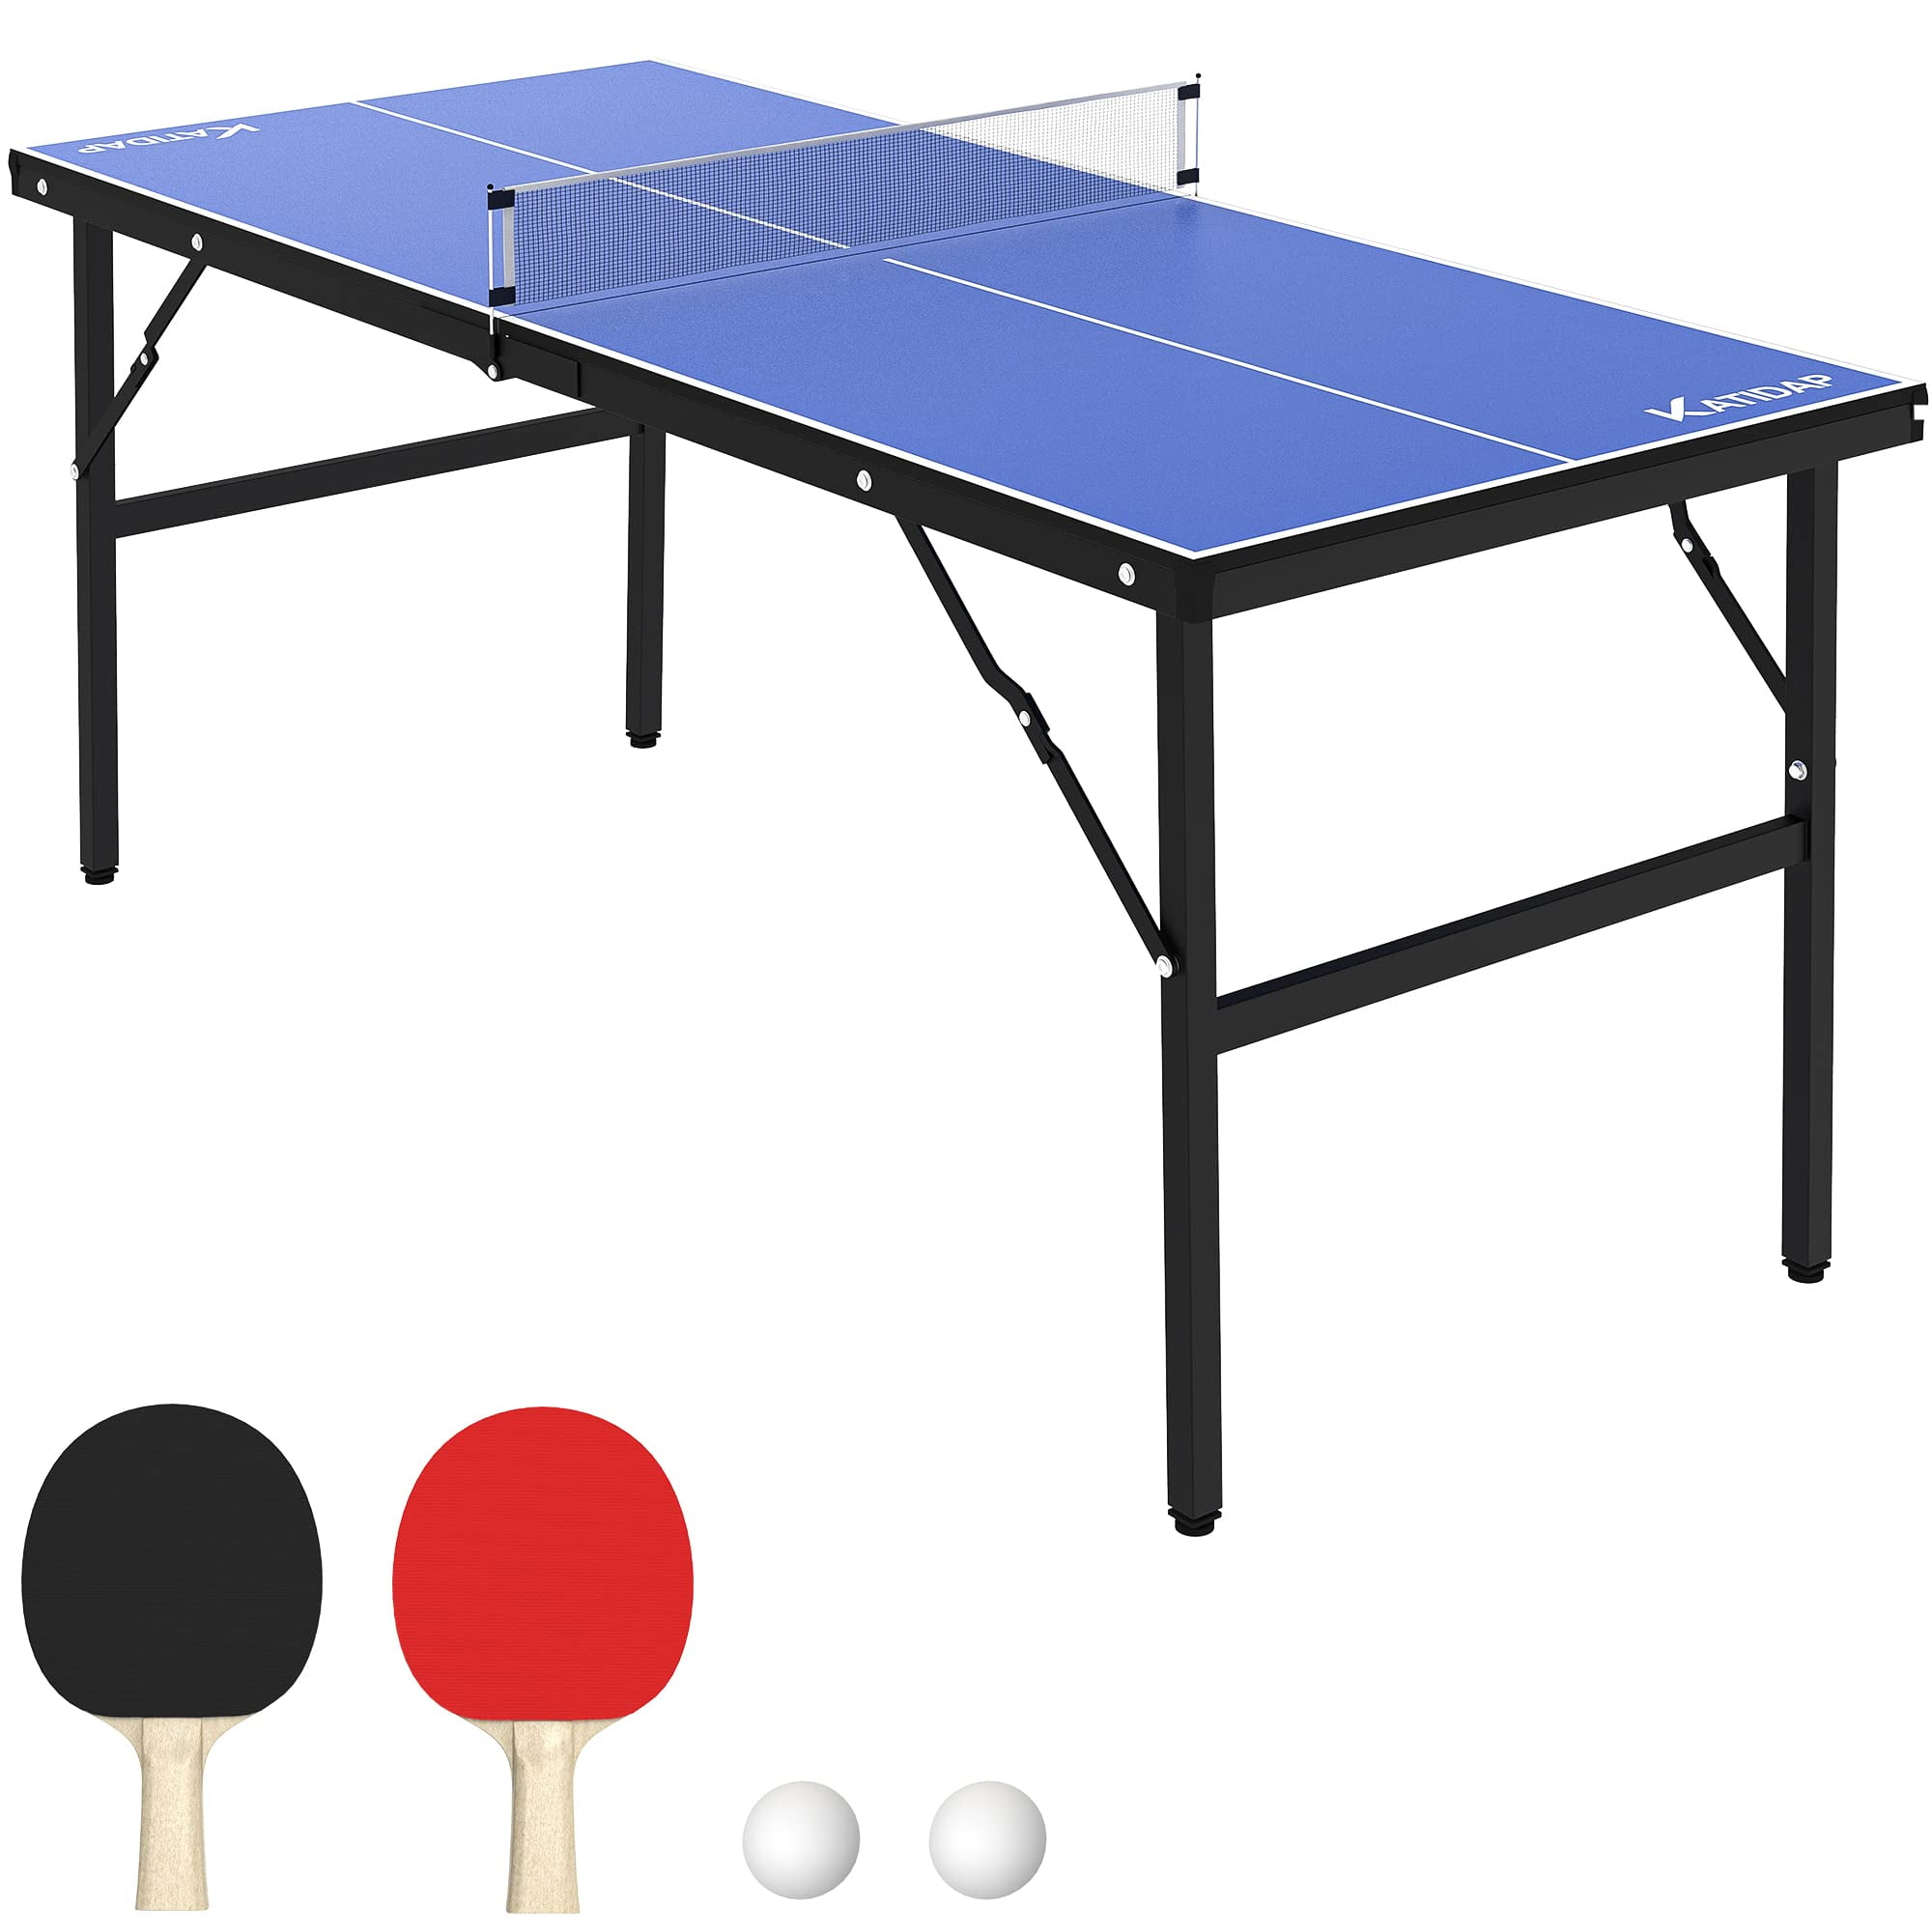 Indoor Outdoor Table Tennis Ping Pong Table With Net Blue 152cm Adjustable New 